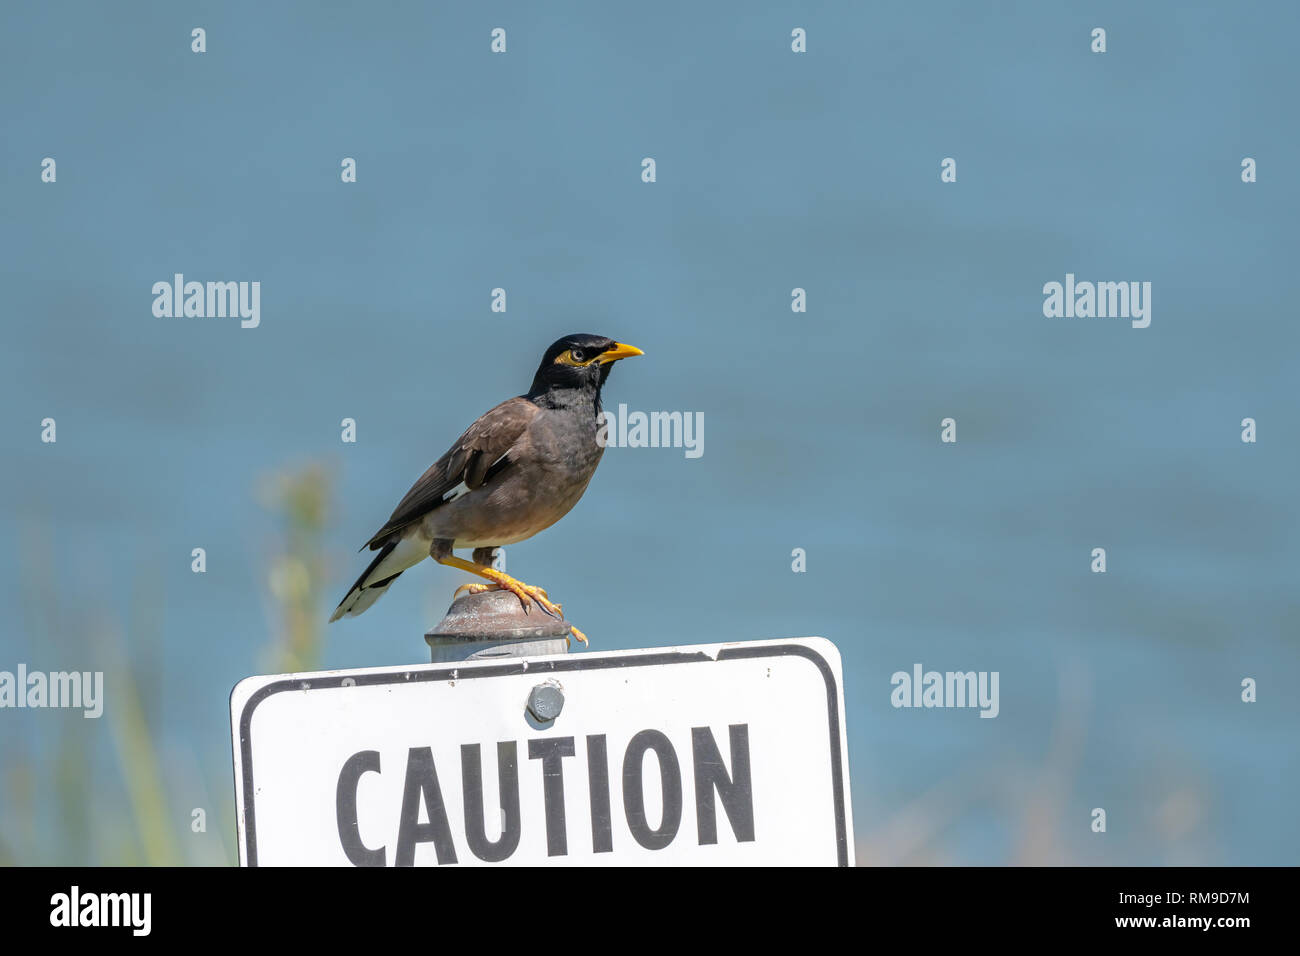 Caution with Common Myna [Acridotheres tristis], the survivor master, spotted at Sydney Centennial Park, Common Mynas were introduced in Australia by Stock Photo